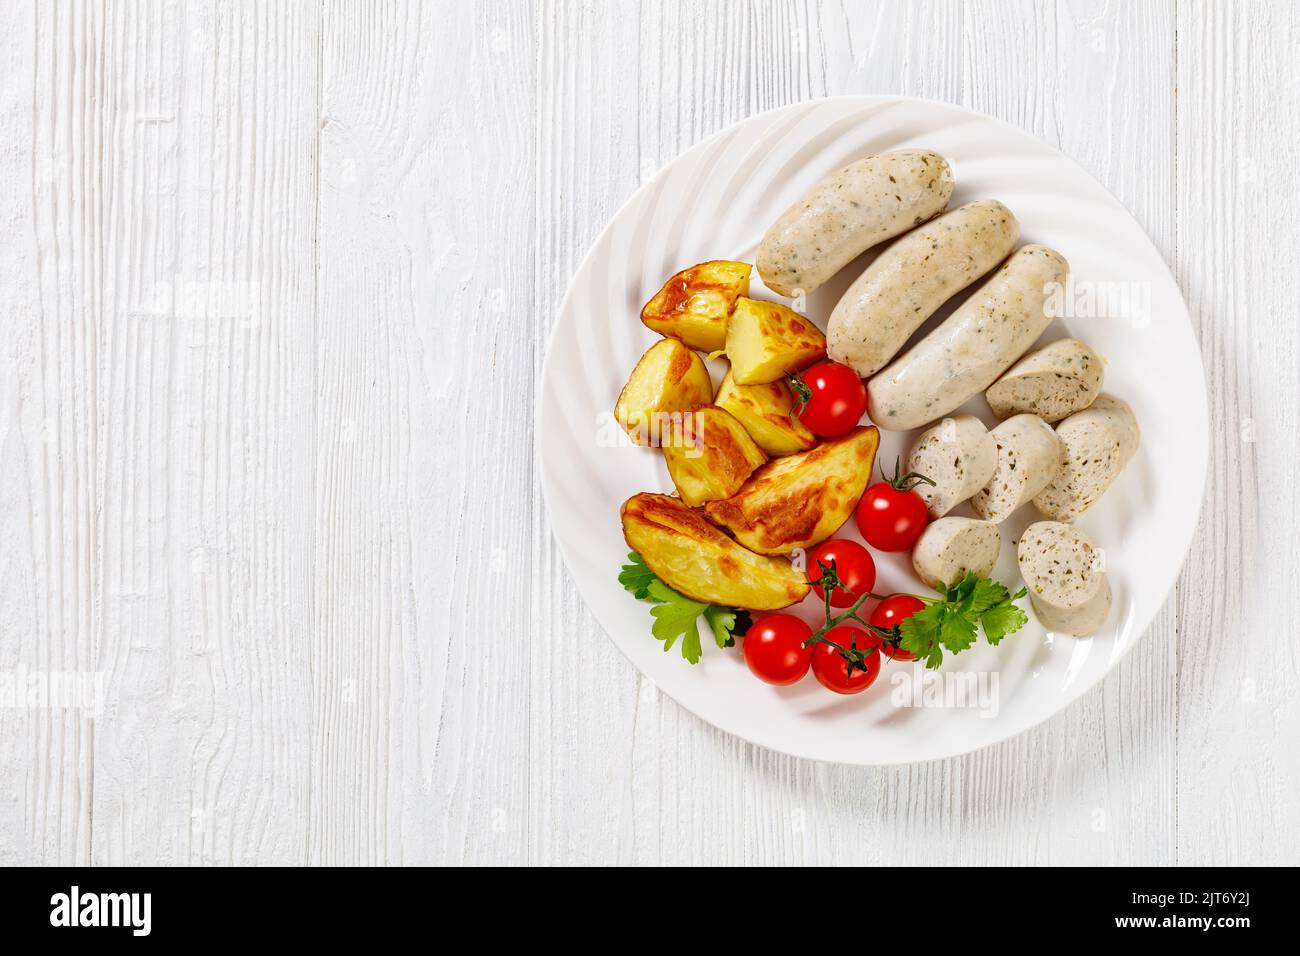 Weisswurst, bavarian white sausage of minced veal, pork back bacon, spices and parsley on white plate with roast potatoes, fresh tomatoes, horizontal Stock Photo